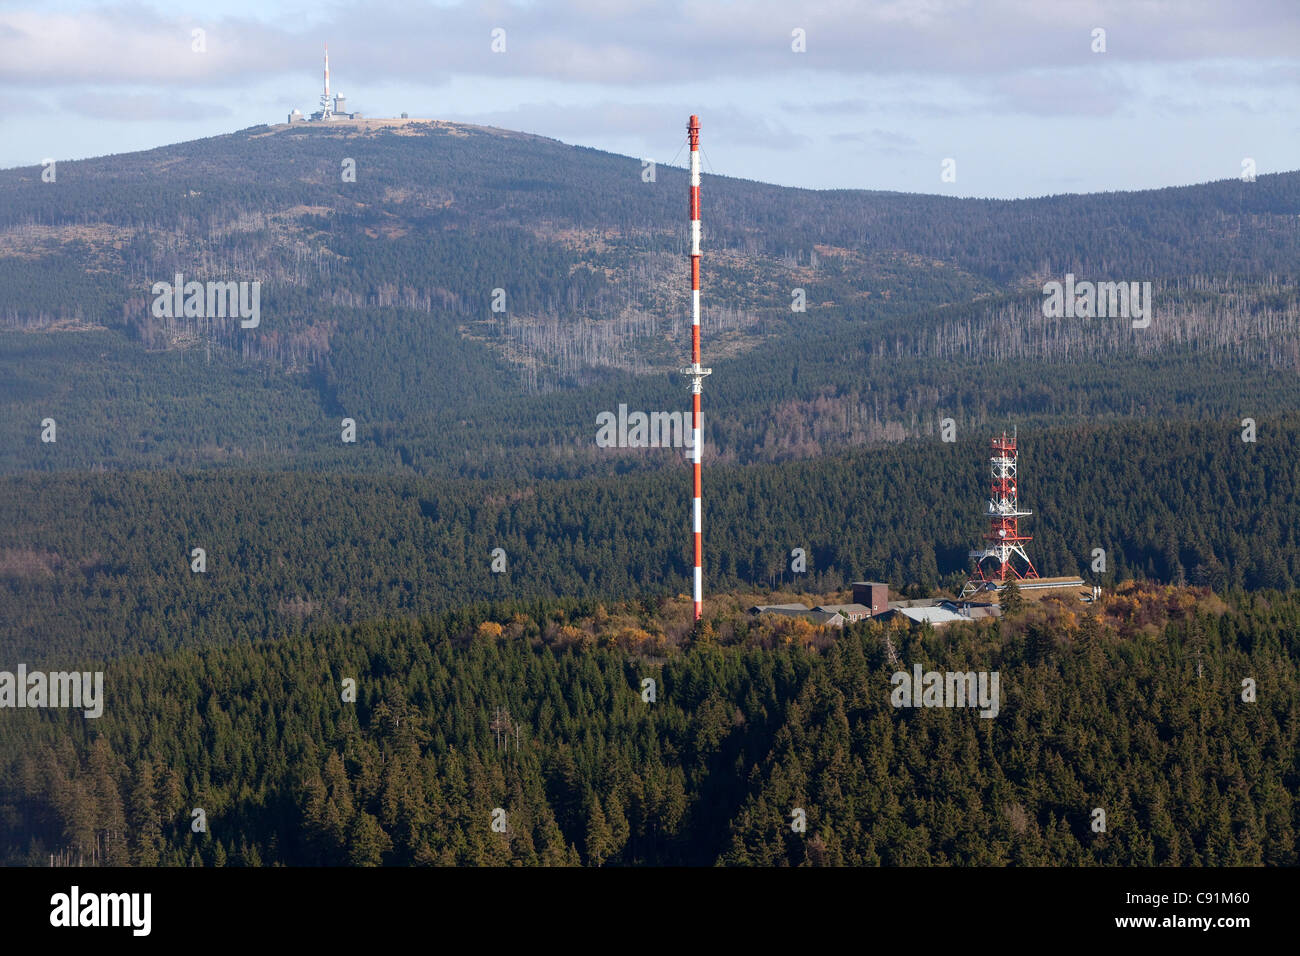 Aerial of the Brocken mountain, transmitter mast, forest, Lower Saxony, Germany Stock Photo